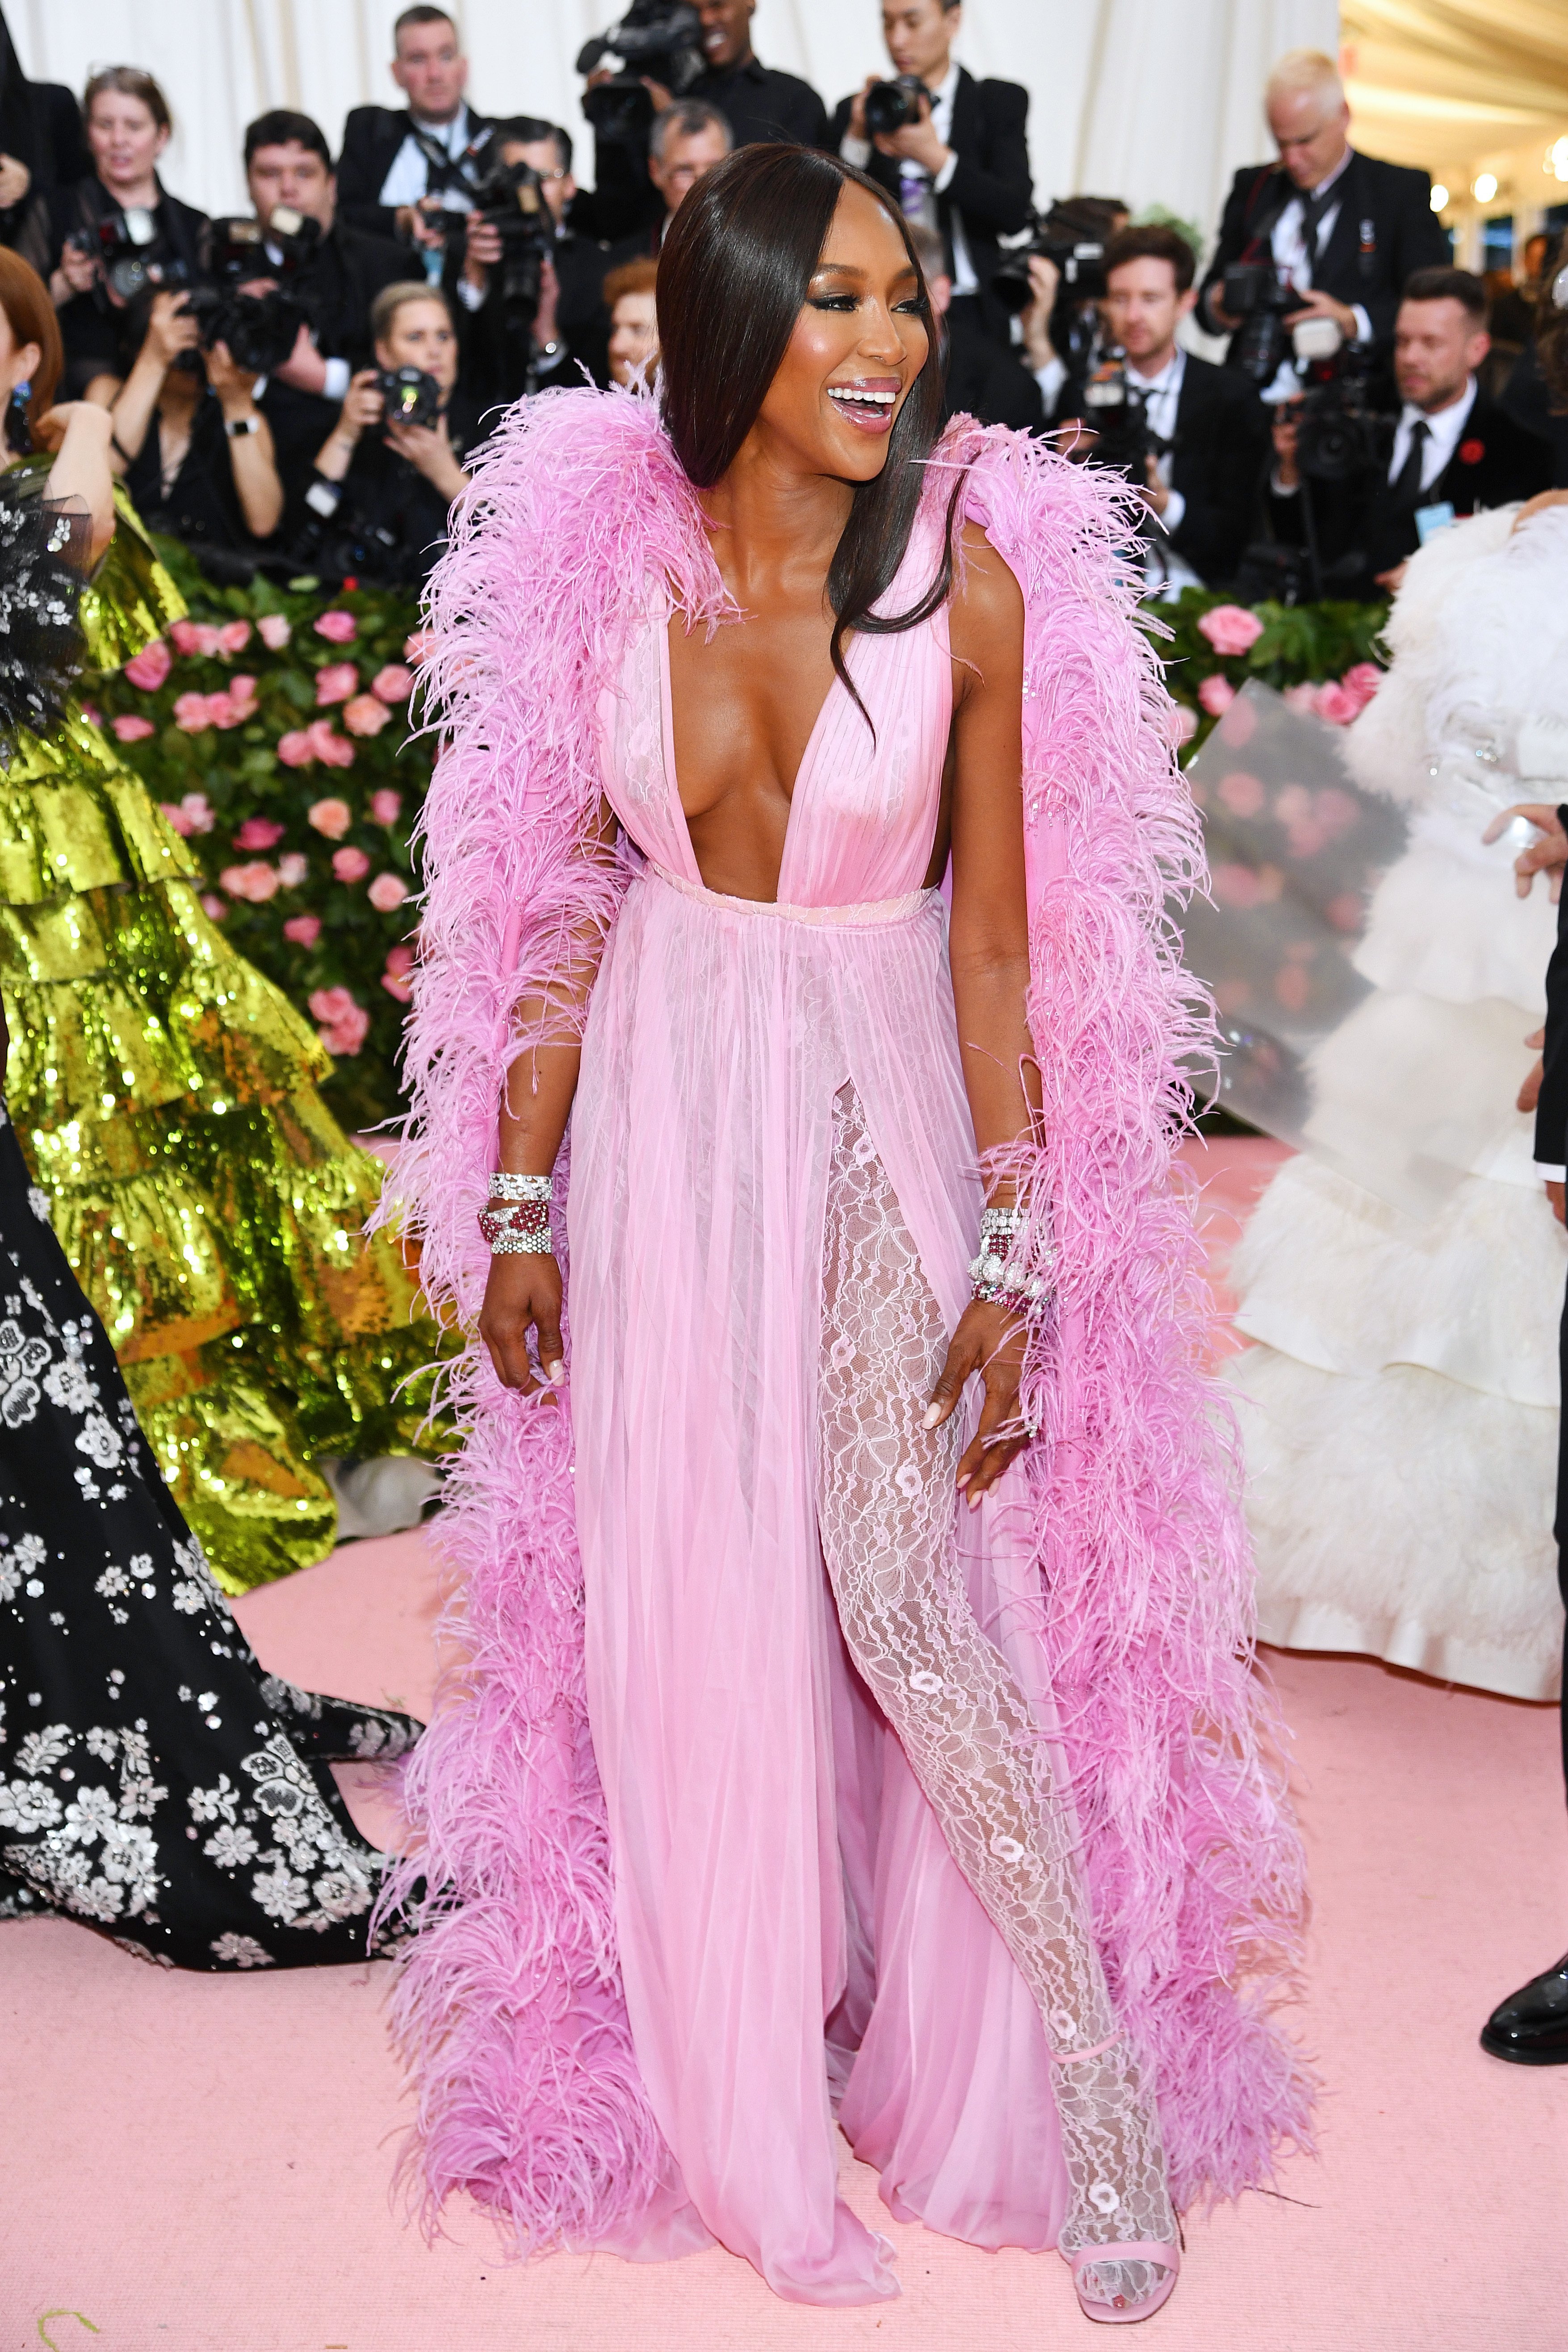 Naomi Campbell attends The 2019 Met Gala Celebrating Camp: Notes on Fashion at Metropolitan Museum of Art on May 06, 2019 | Photo: GettyImages